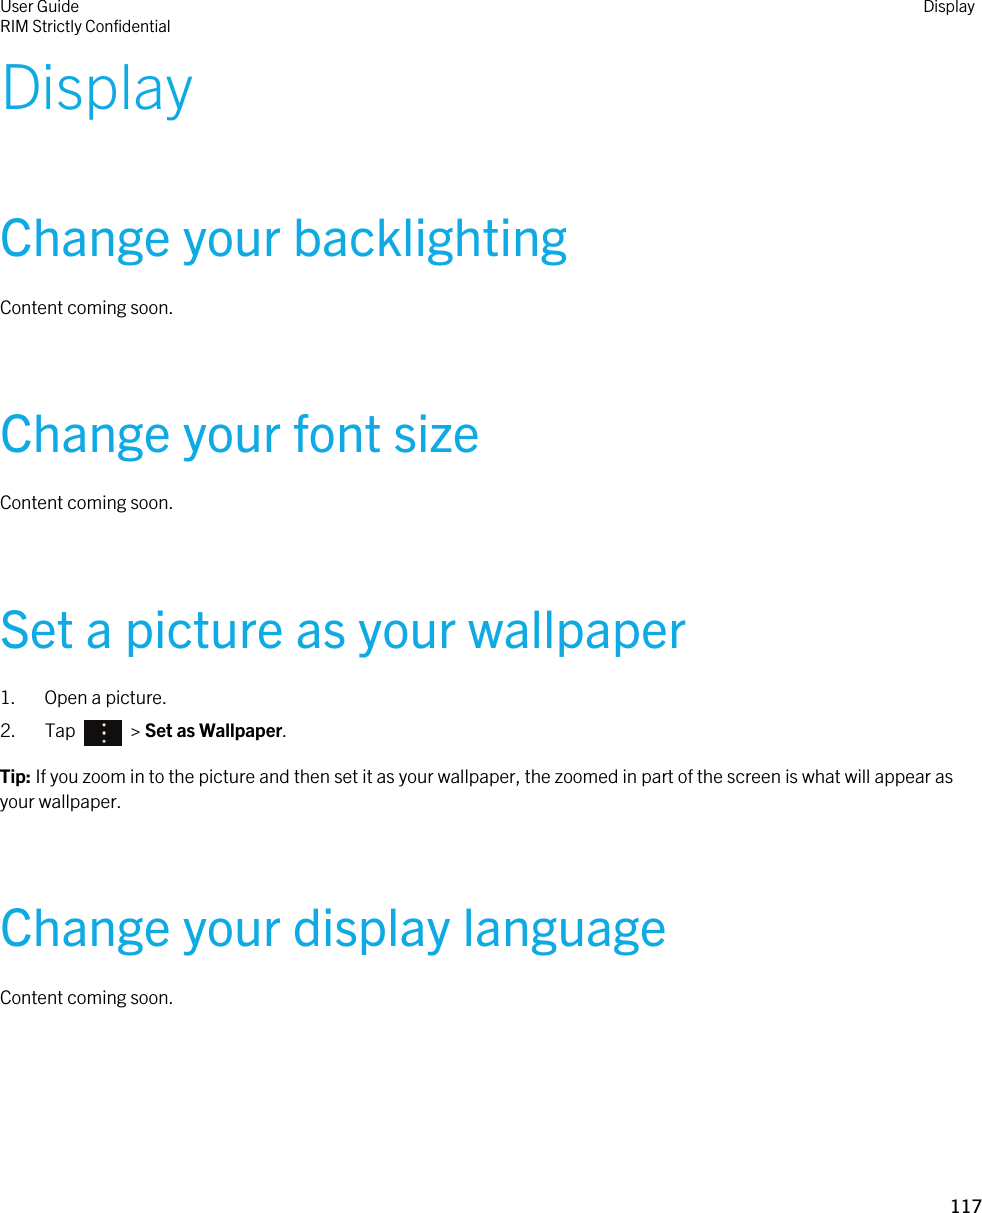 DisplayChange your backlightingContent coming soon.Change your font sizeContent coming soon.Set a picture as your wallpaper1. Open a picture.2.  Tap    &gt; Set as Wallpaper.Tip: If you zoom in to the picture and then set it as your wallpaper, the zoomed in part of the screen is what will appear as your wallpaper.Change your display languageContent coming soon.User GuideRIM Strictly ConfidentialDisplay117 